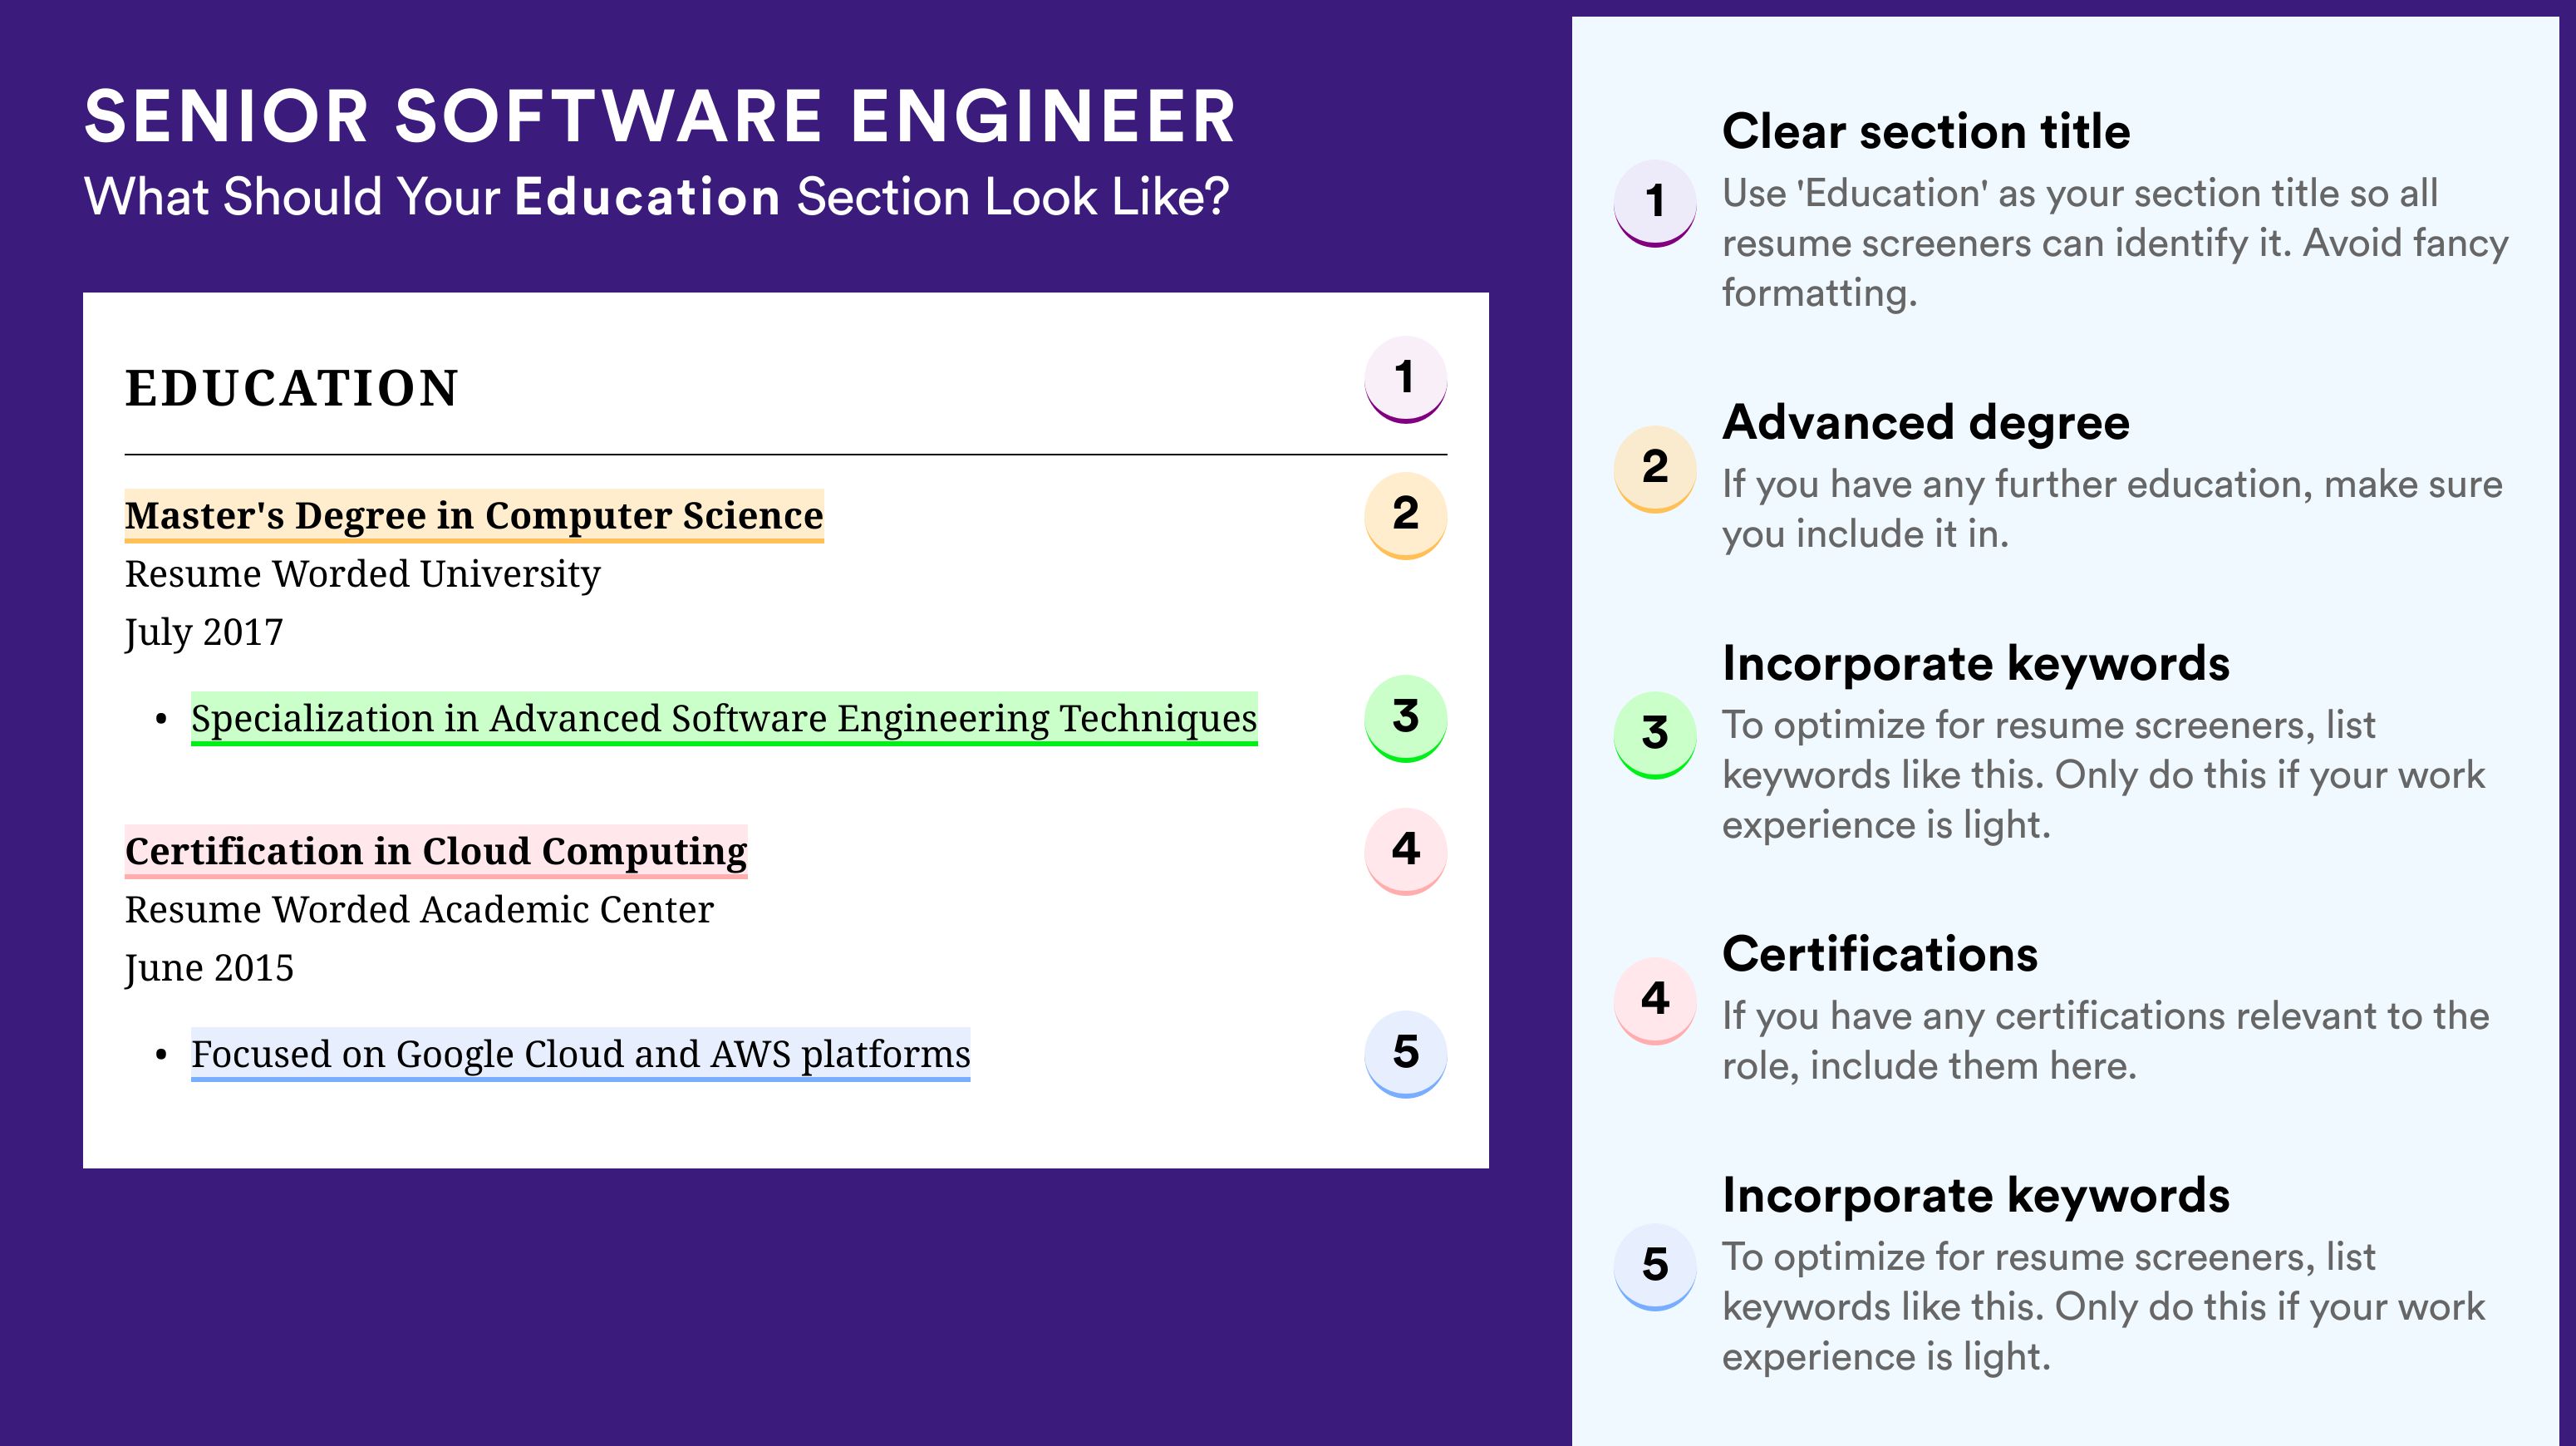 How To Write An Education Section - Senior Software Engineer Roles